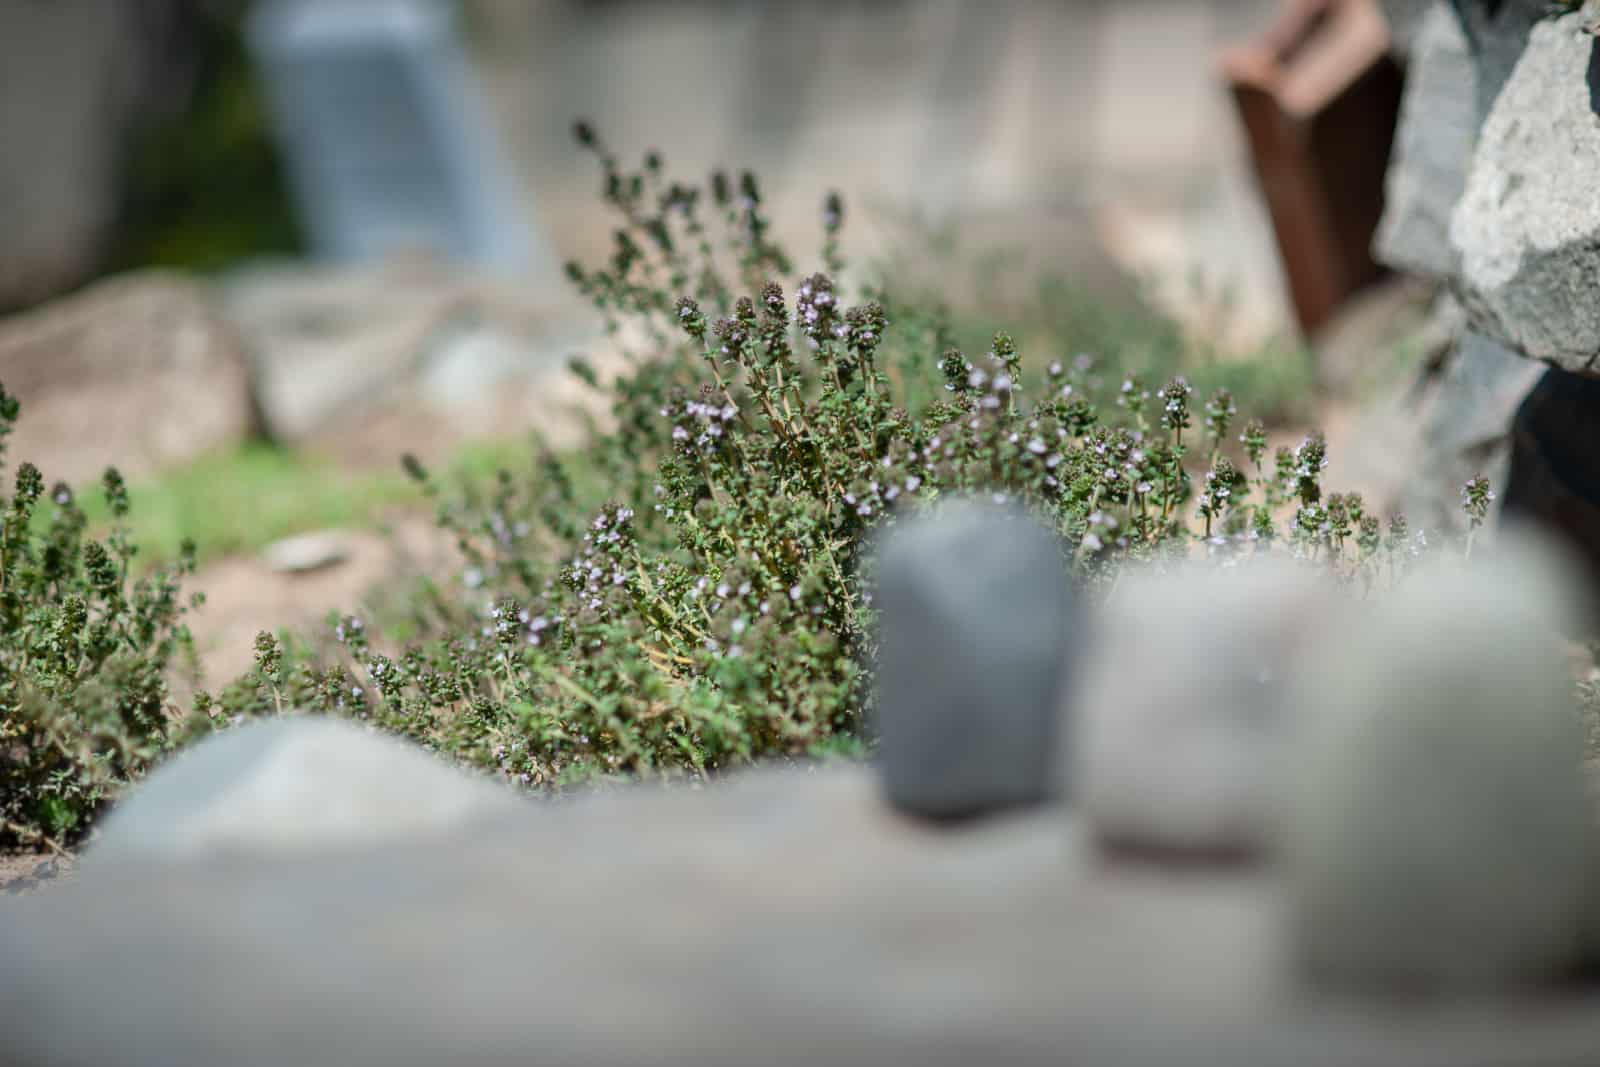 A green thyme Bush with small leaves and small purple flowers grows among the stones